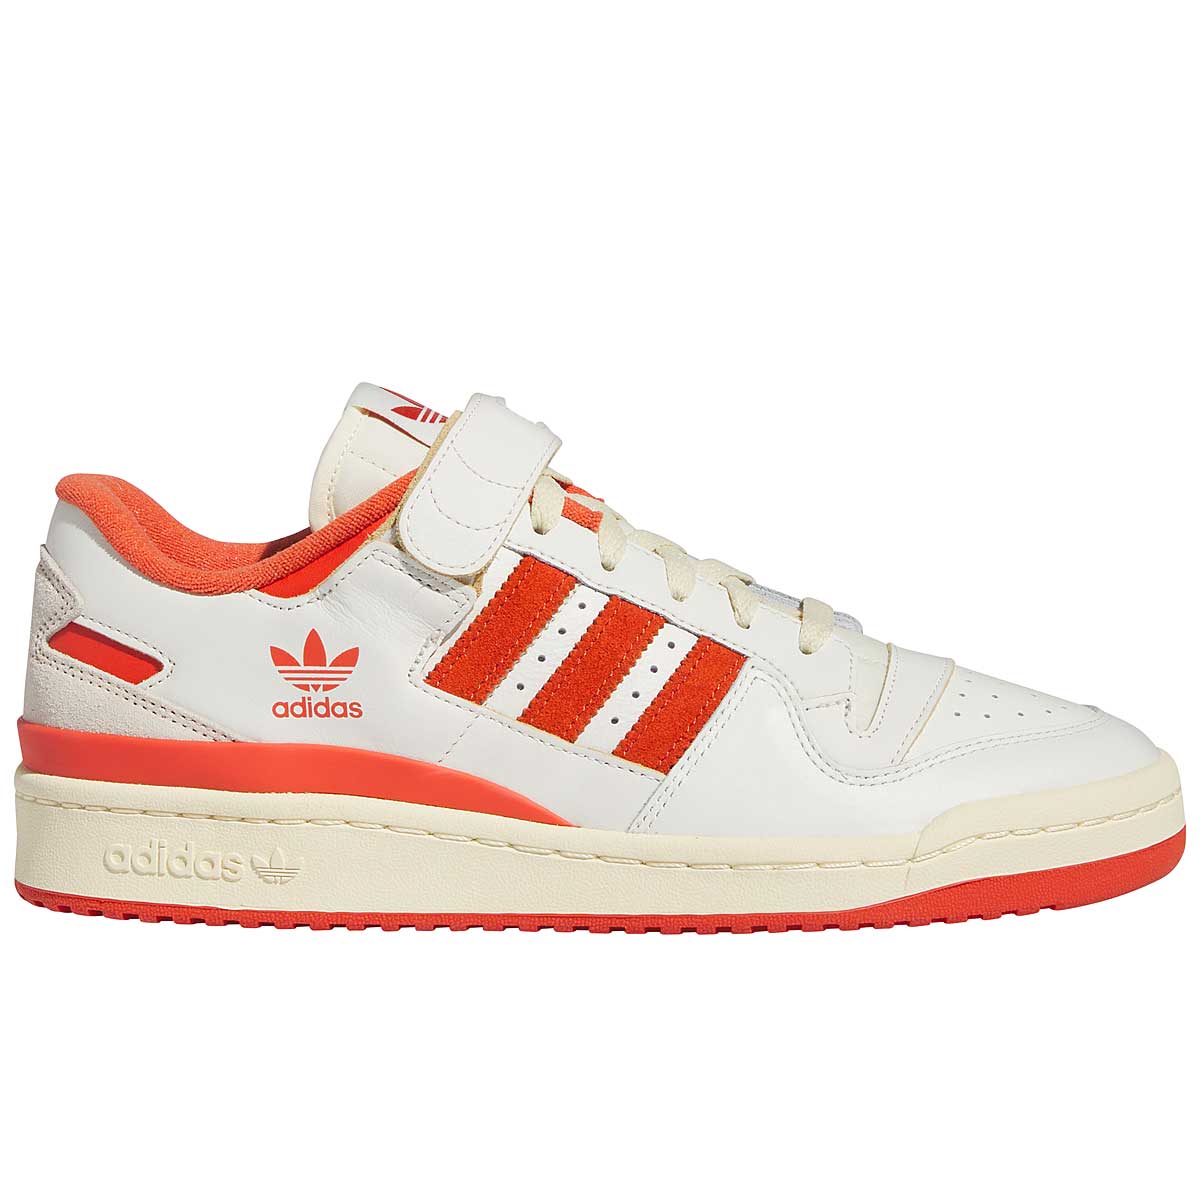 Image of Adidas Forum 84 Low, White/red